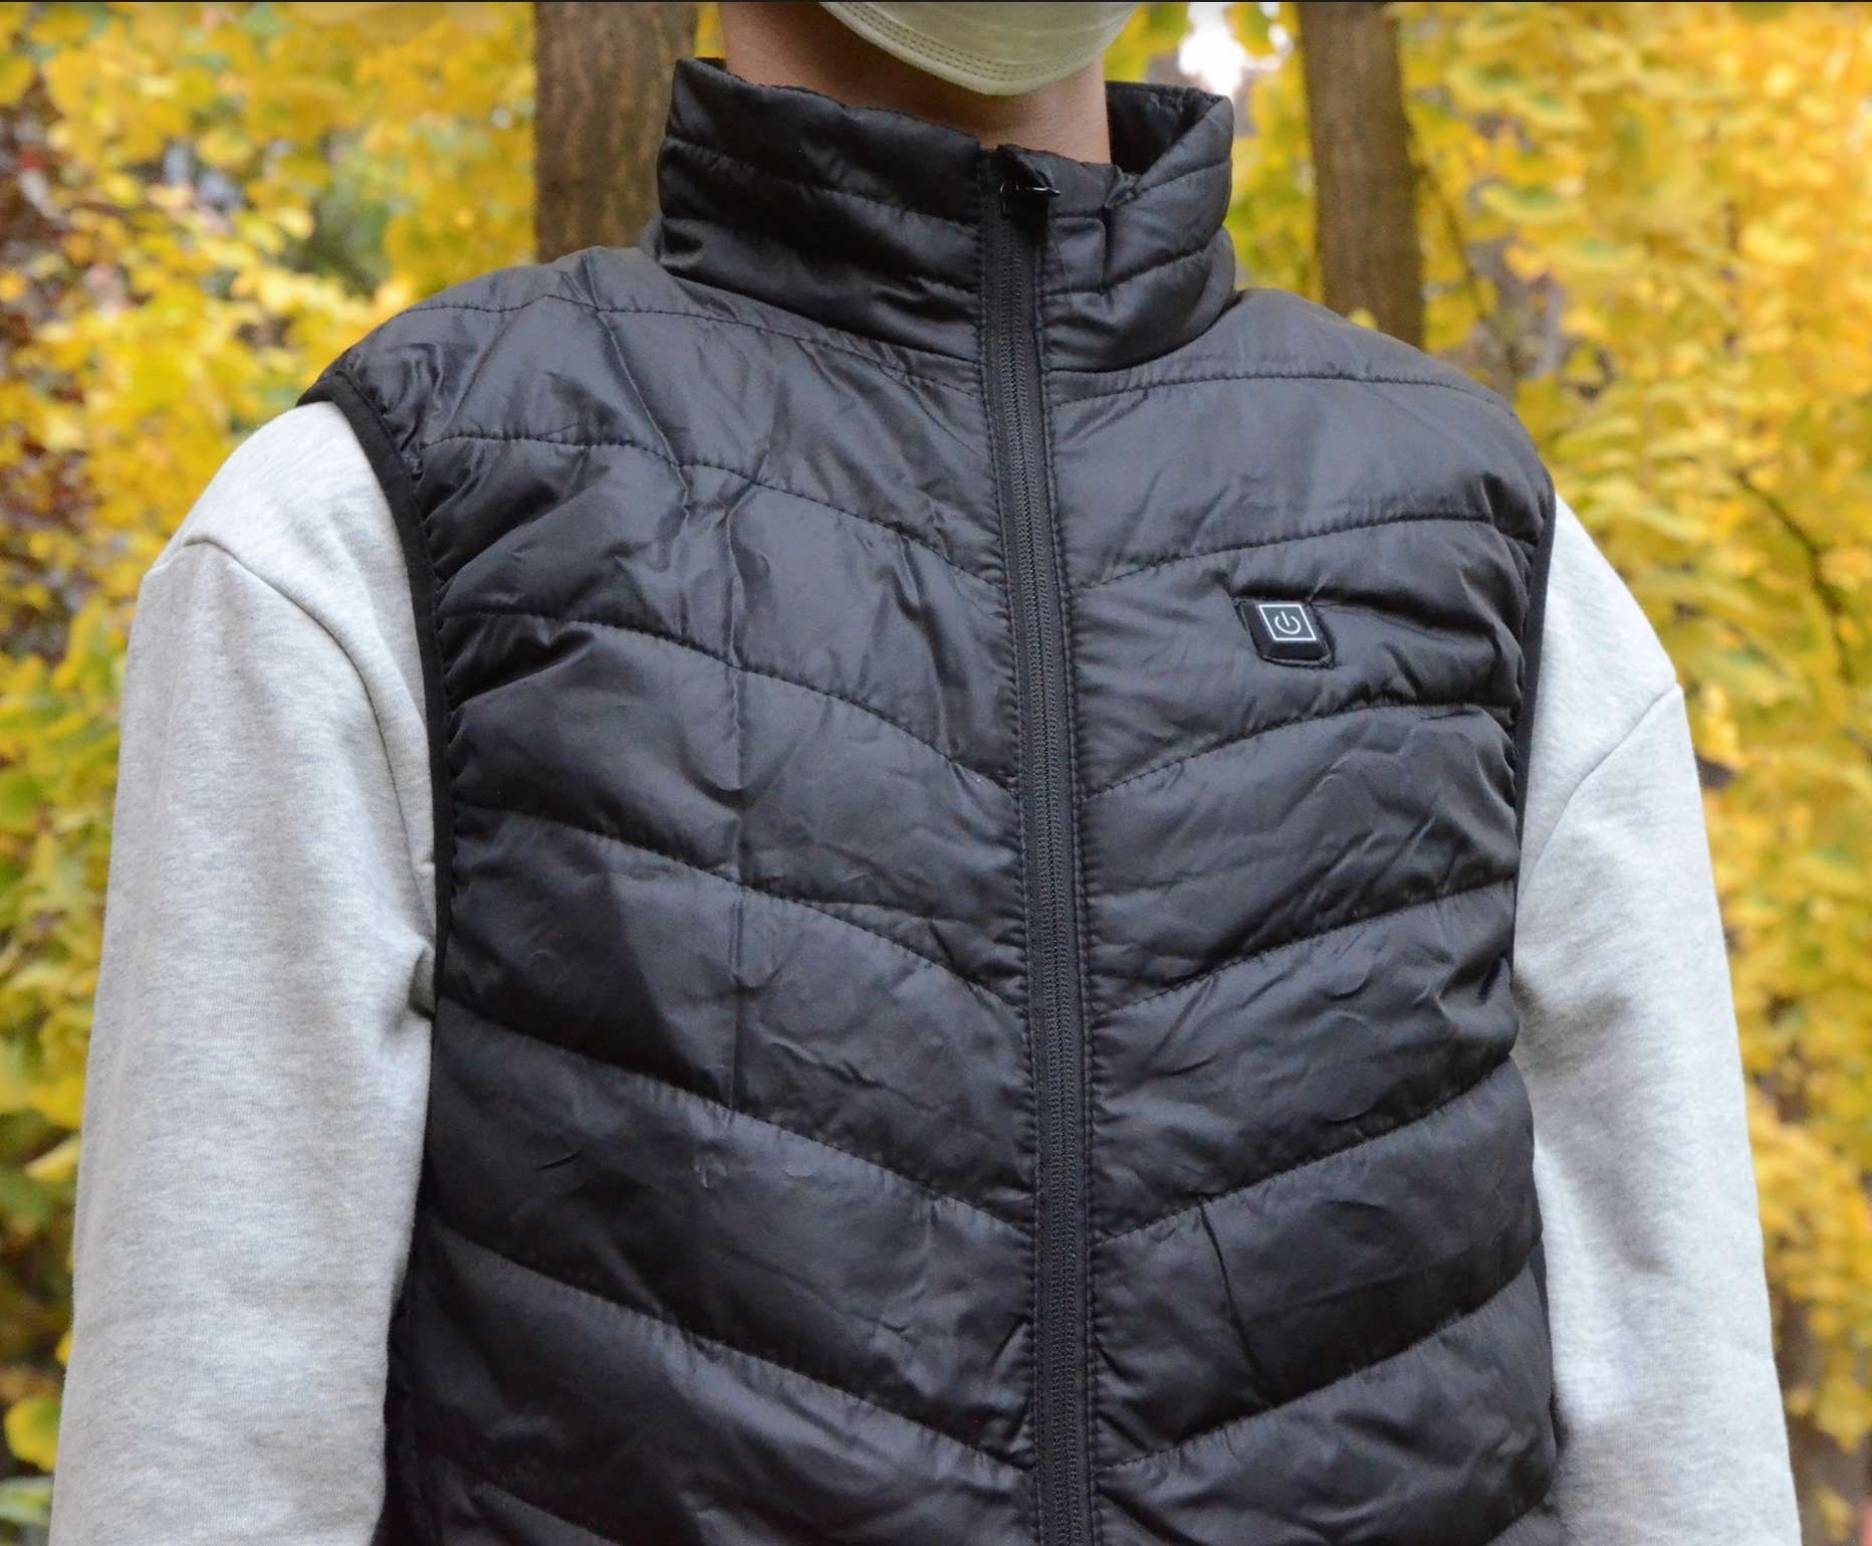 What Is The Best Brand For Heated Vest